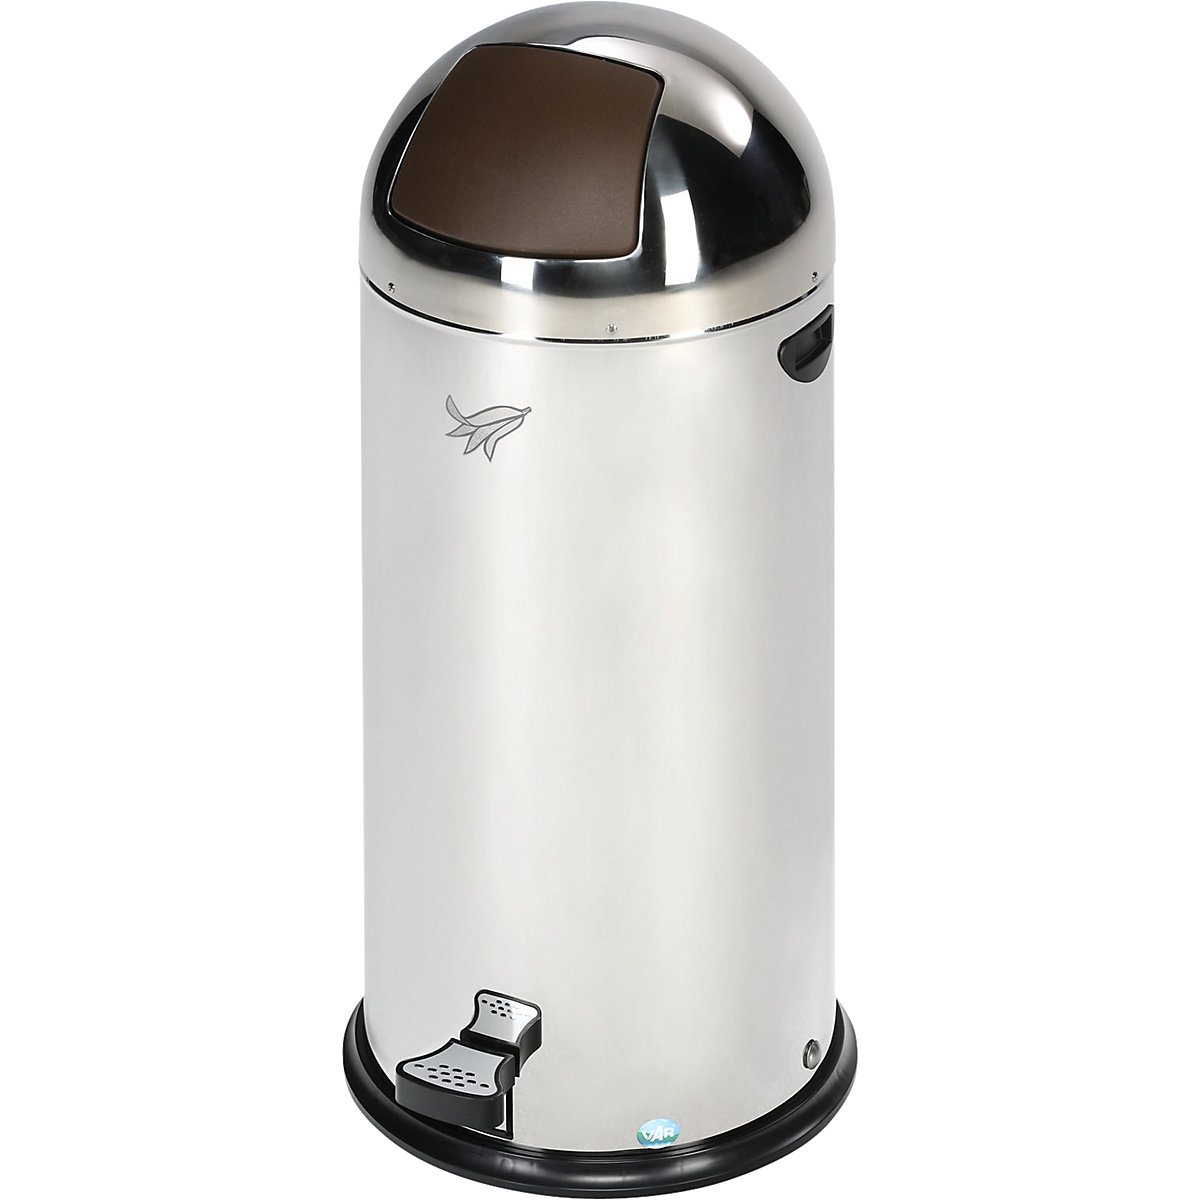 Push waste bin with pedal – VAR